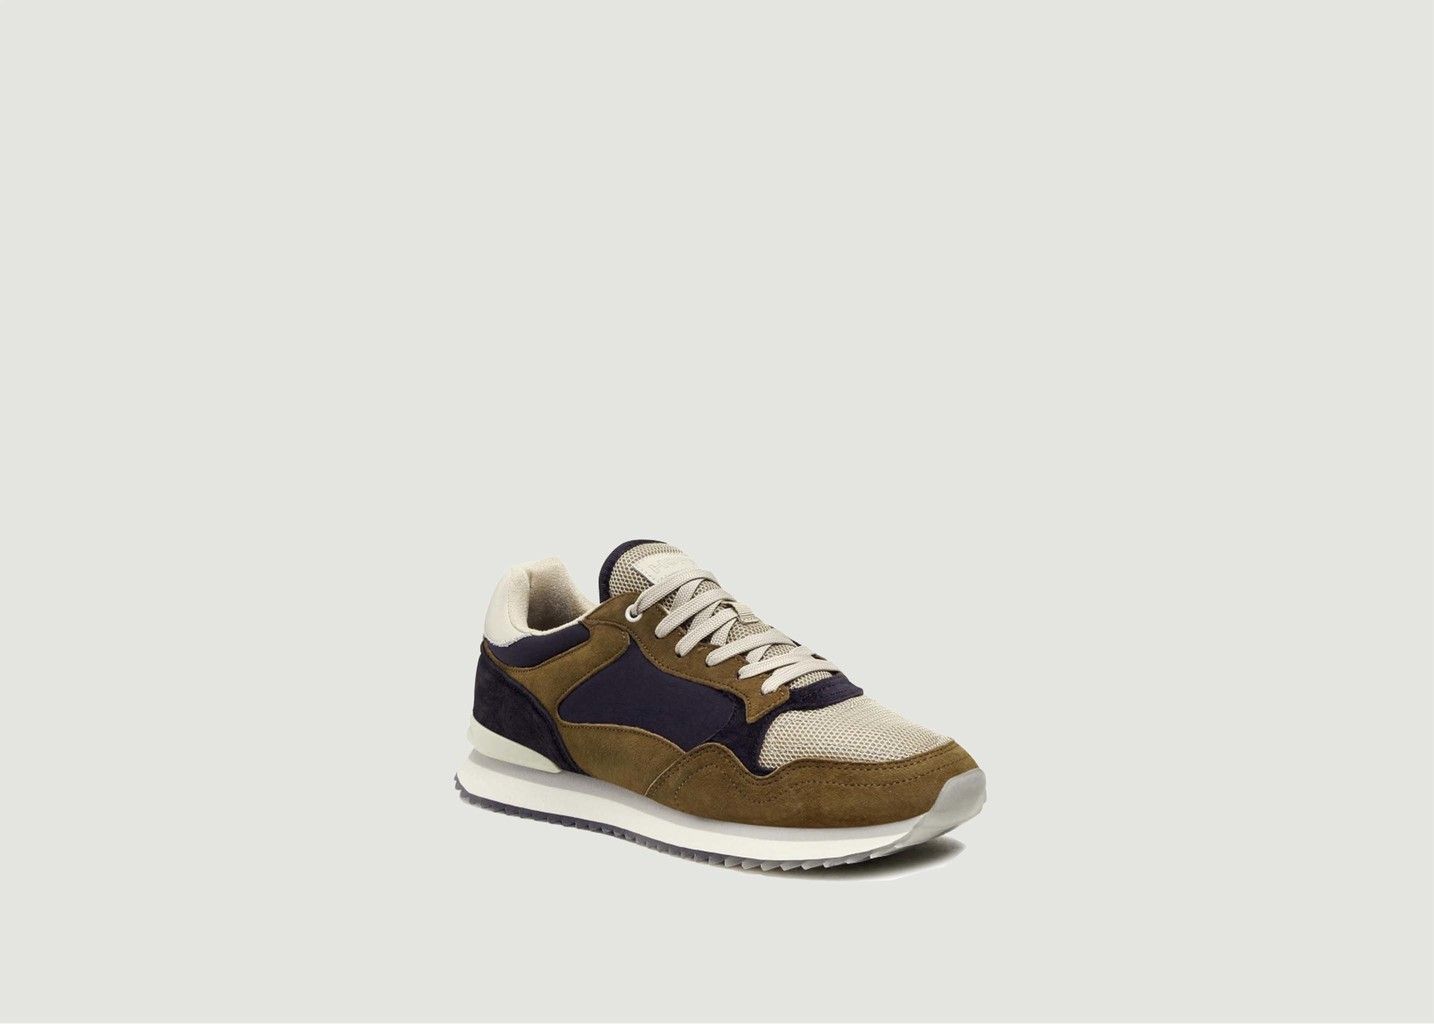 Dubai sneakers in leather and fabric - Hoff